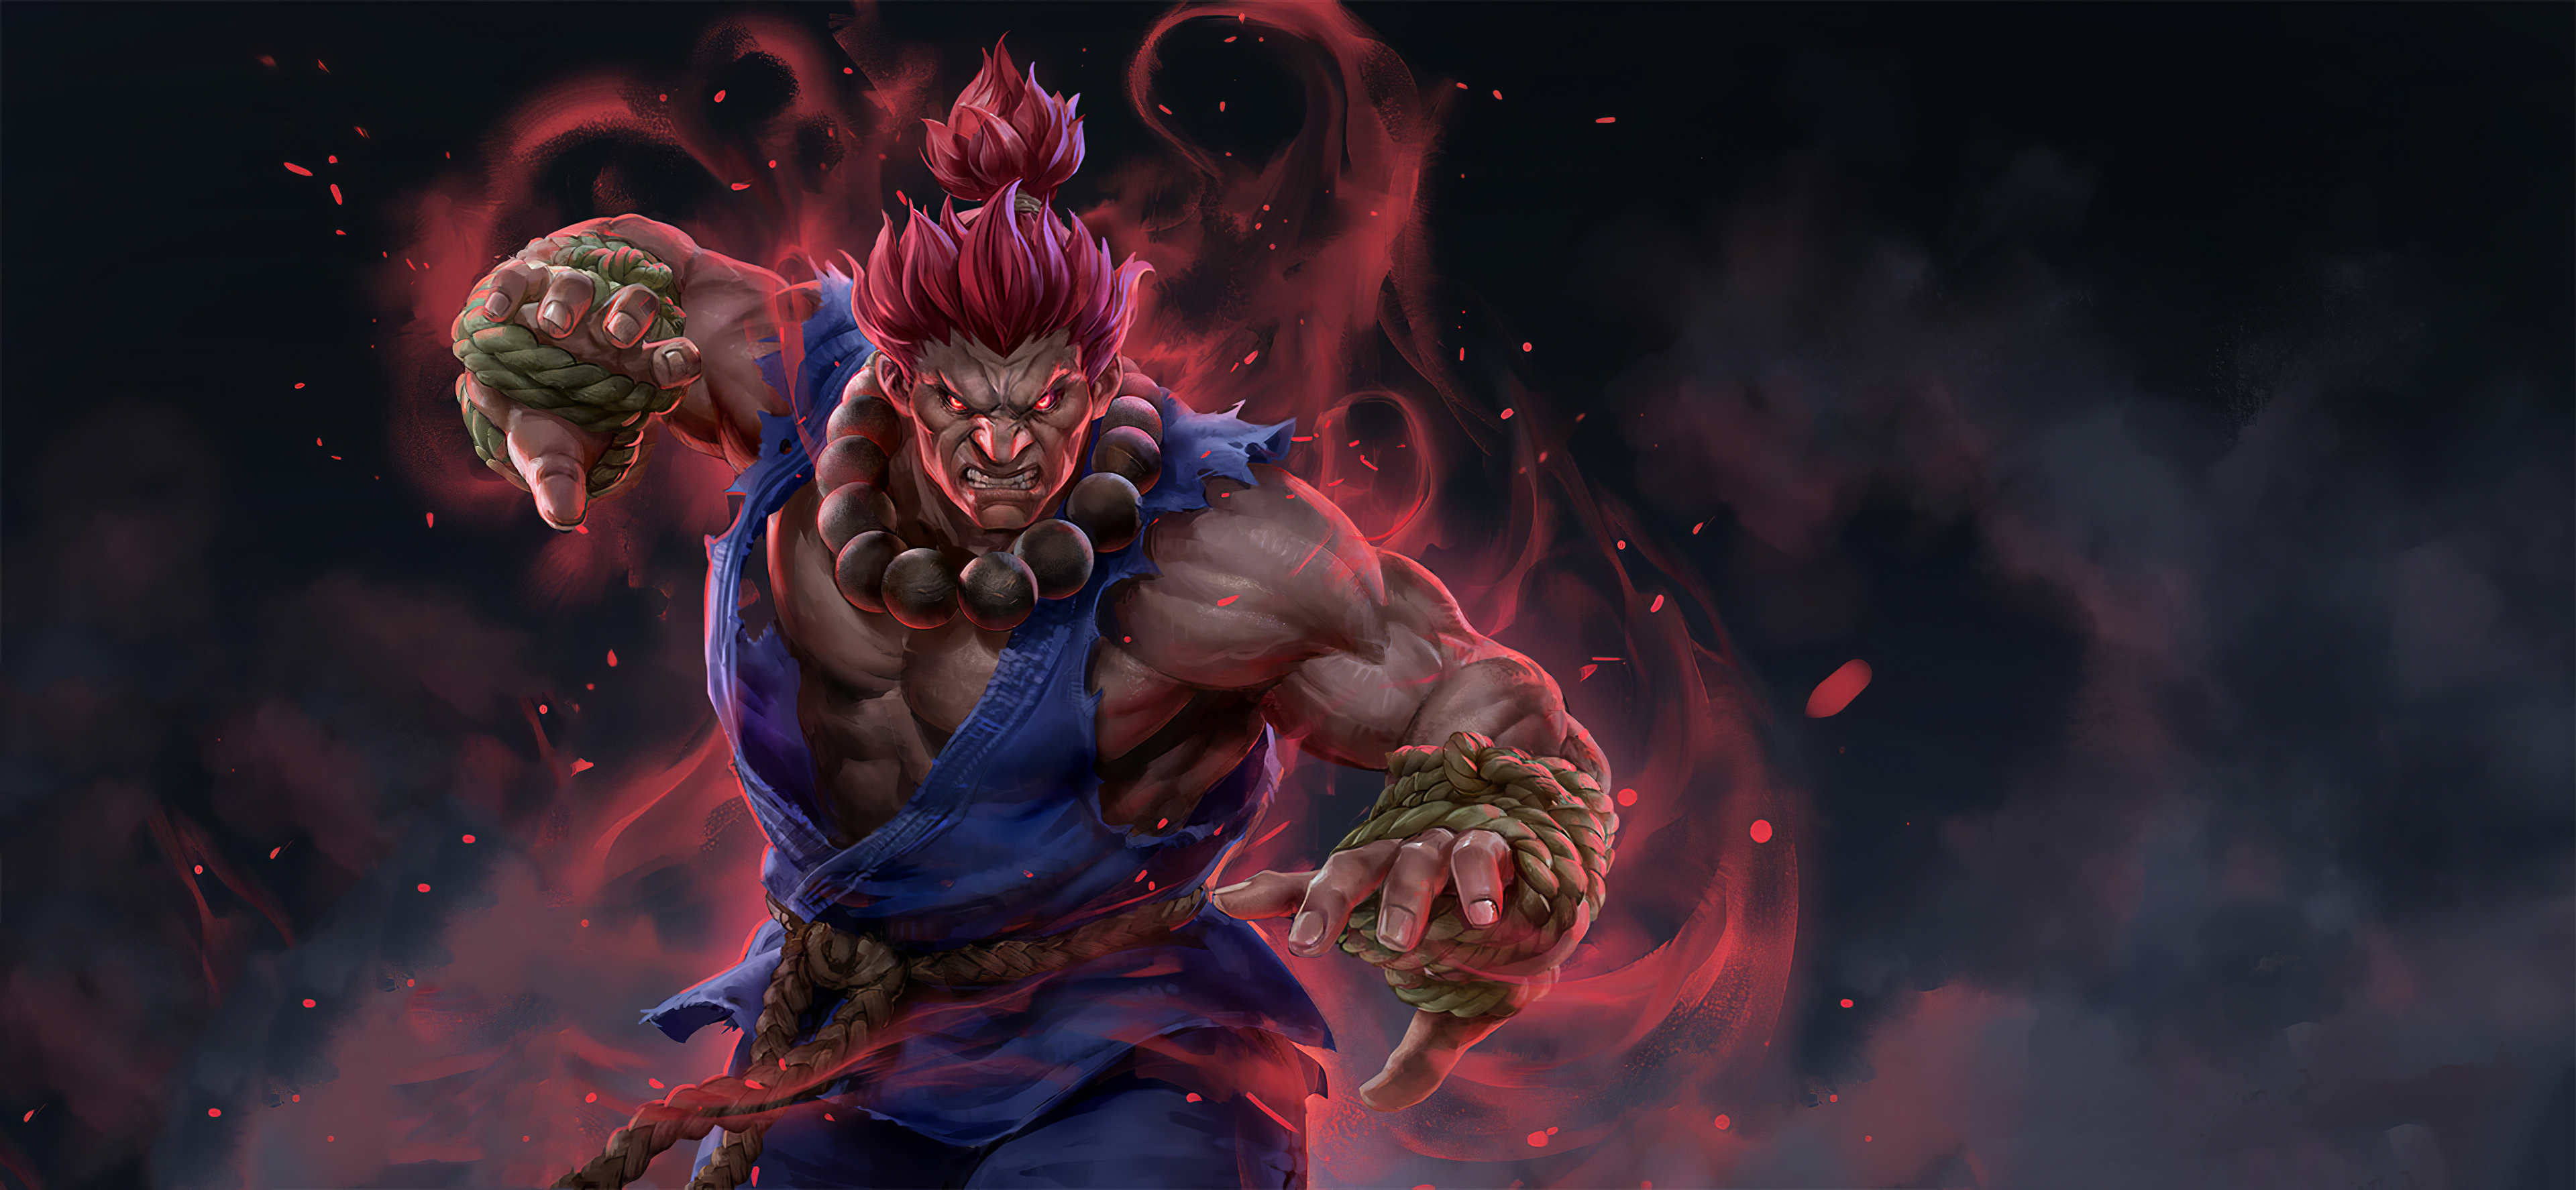 1920x1200 Akuma Artwork Street Fighter 1200p Wallpaper Hd Games 4k Wallpapers Images Photos And Background Wallpapers Den